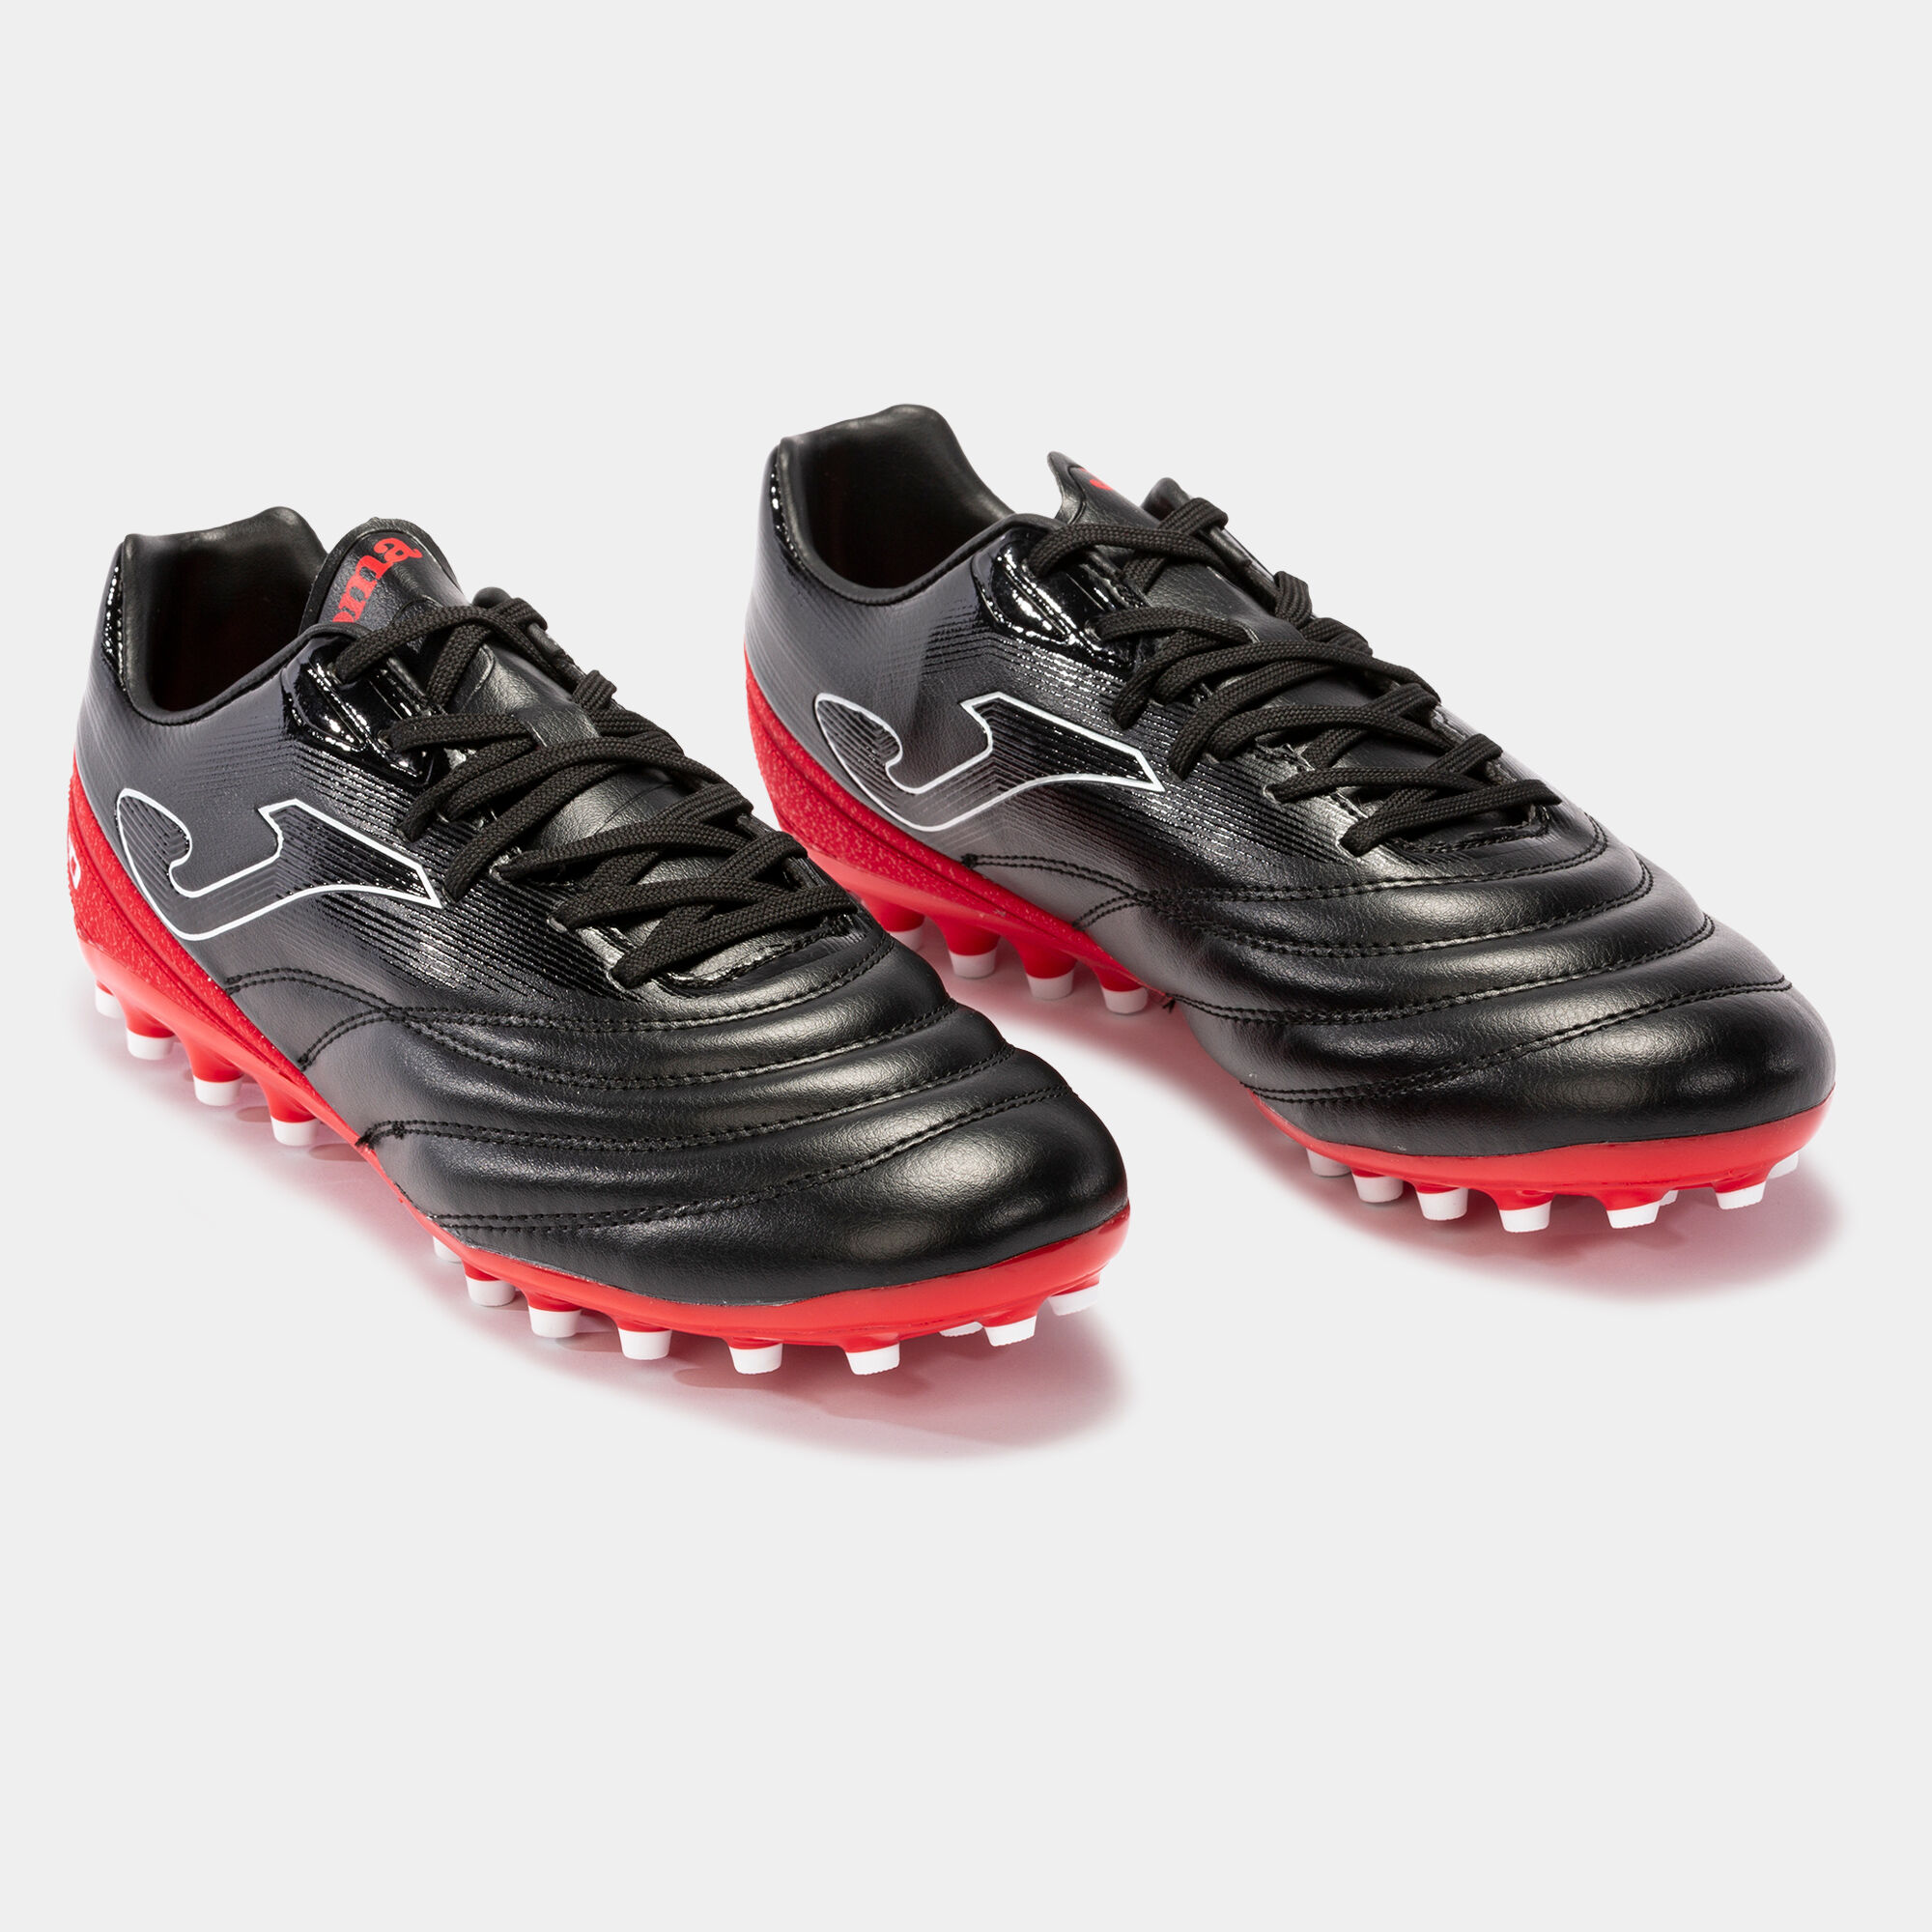 Chaussures football N-10 22 gazon synthétique AG noir rouge